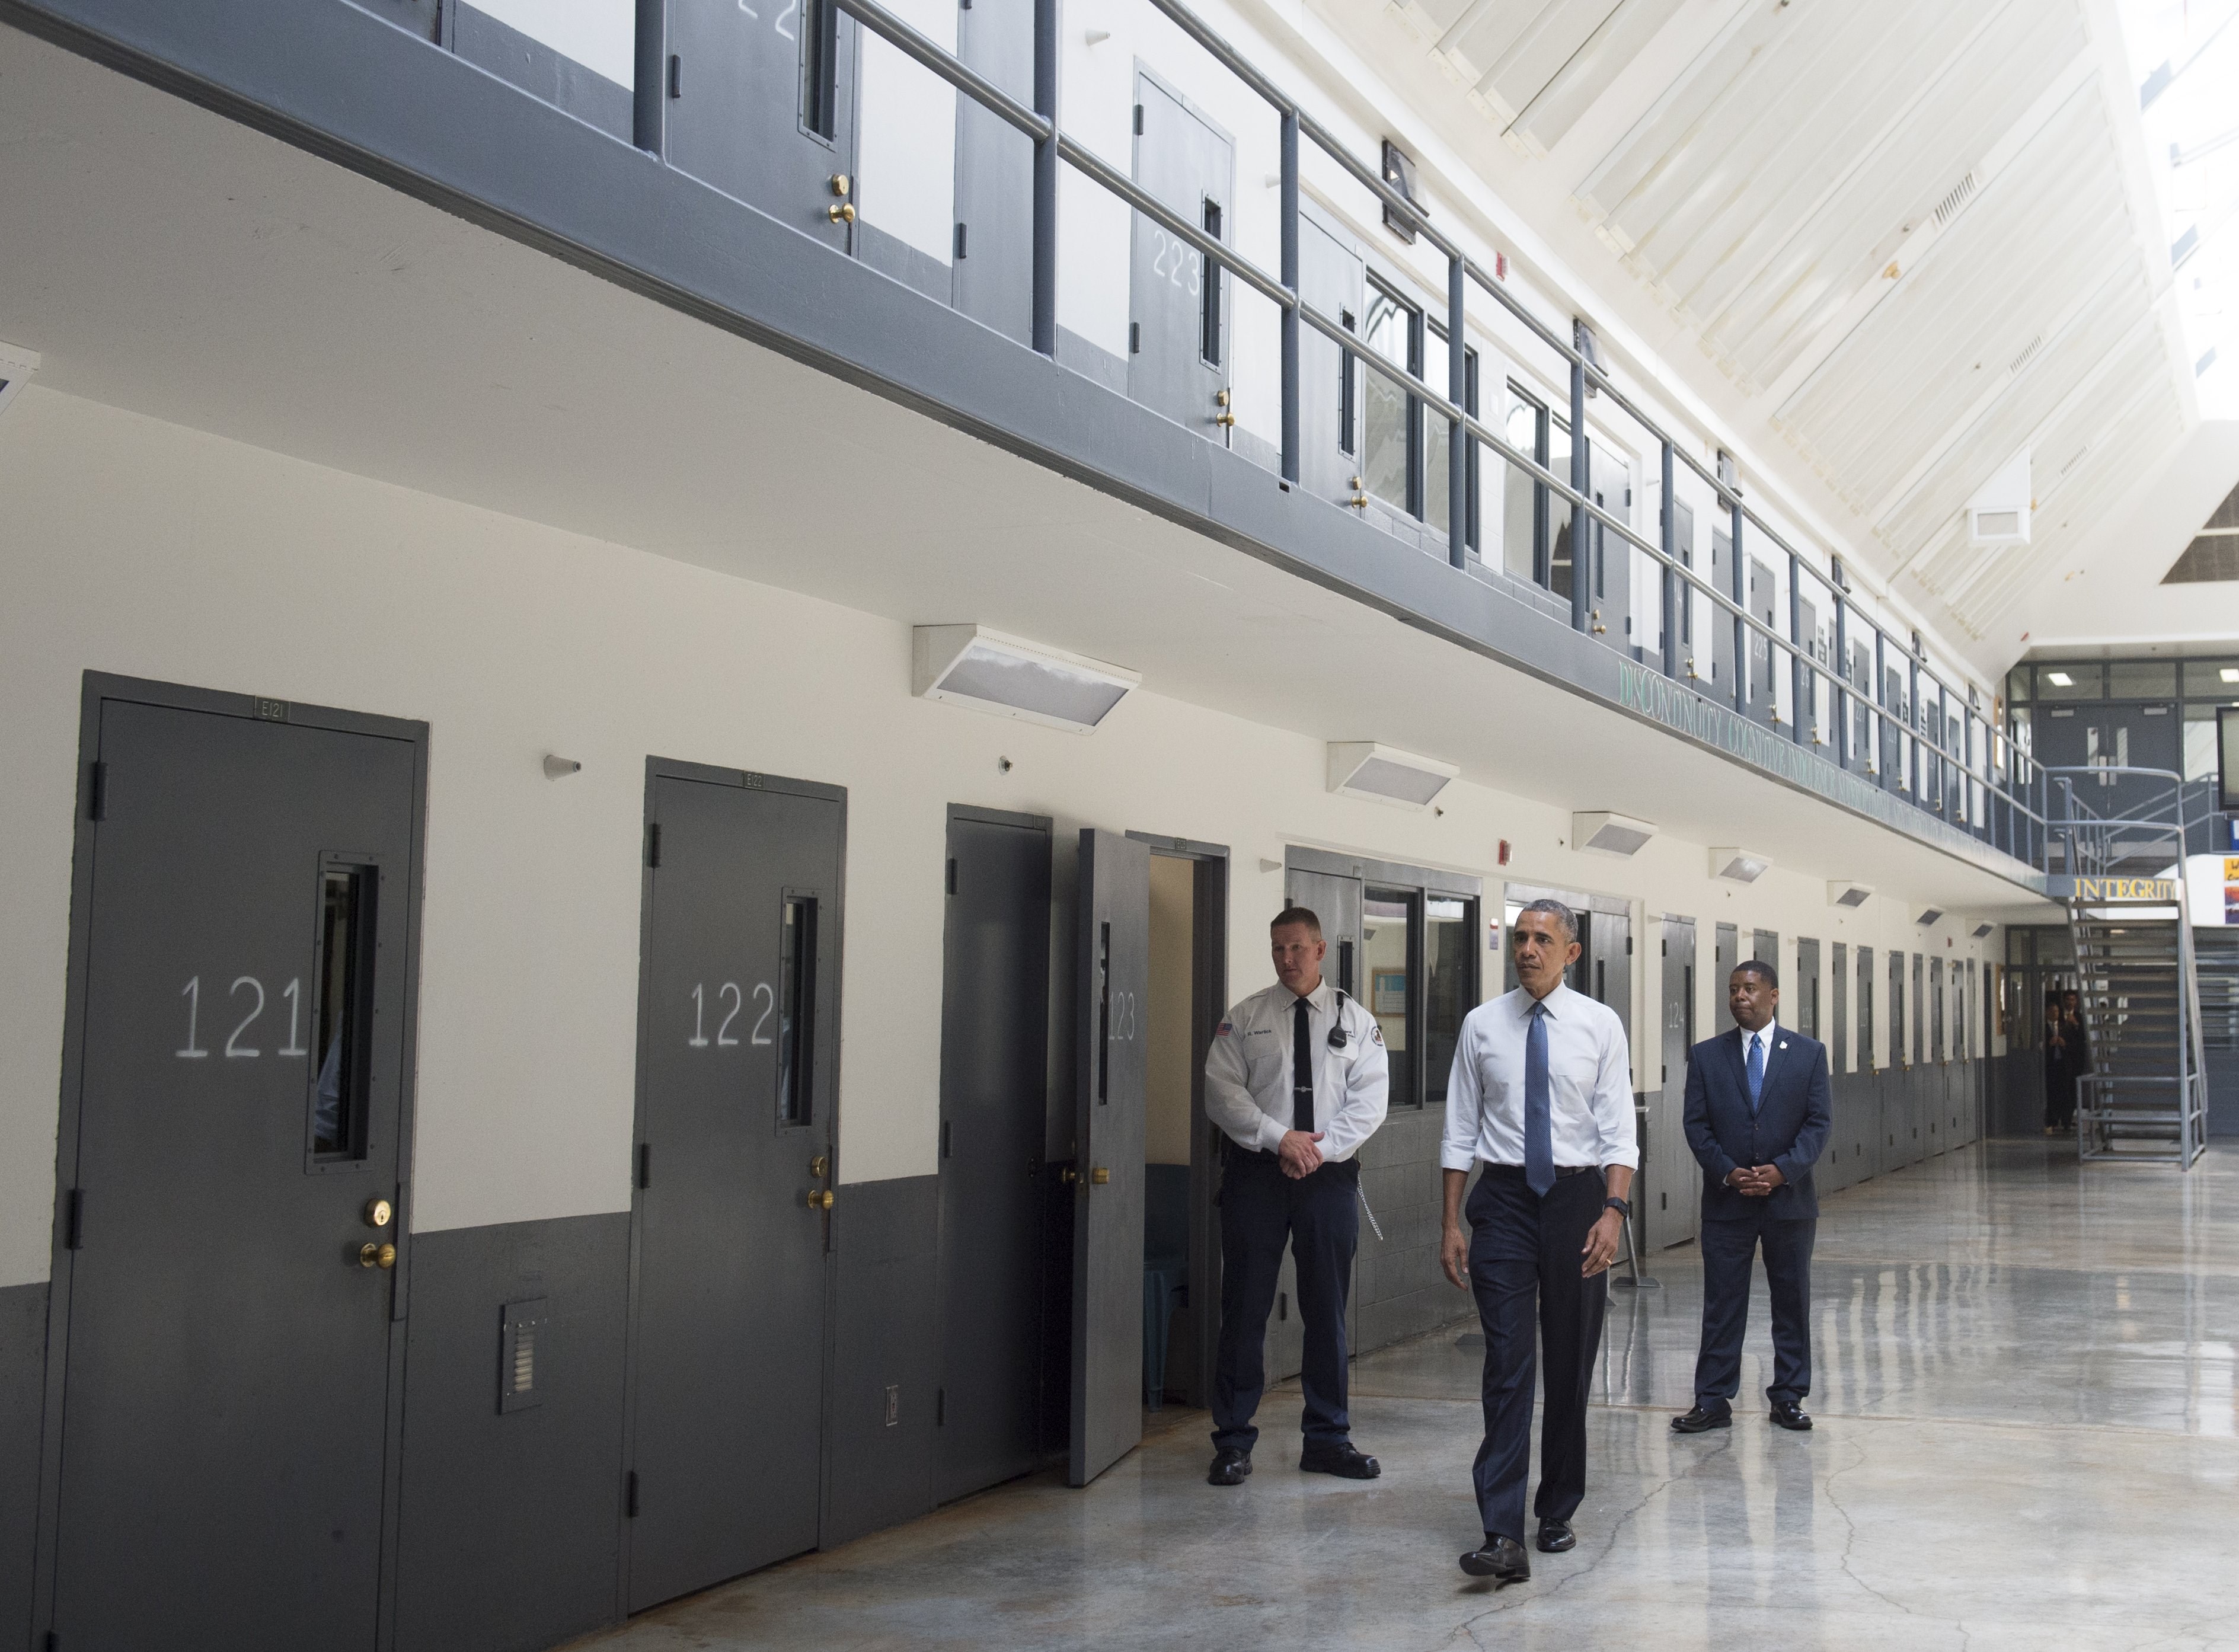 Barack Obama, alongside Charles Samuels (R), Bureau of Prisons Director, and Ronald Warlick (L), a correctional officer, tours a cell block at the El Reno Federal Correctional Institution in El Reno, Oklahoma, July 16, 2015. (Saul Loeb—AFP/Getty Images)